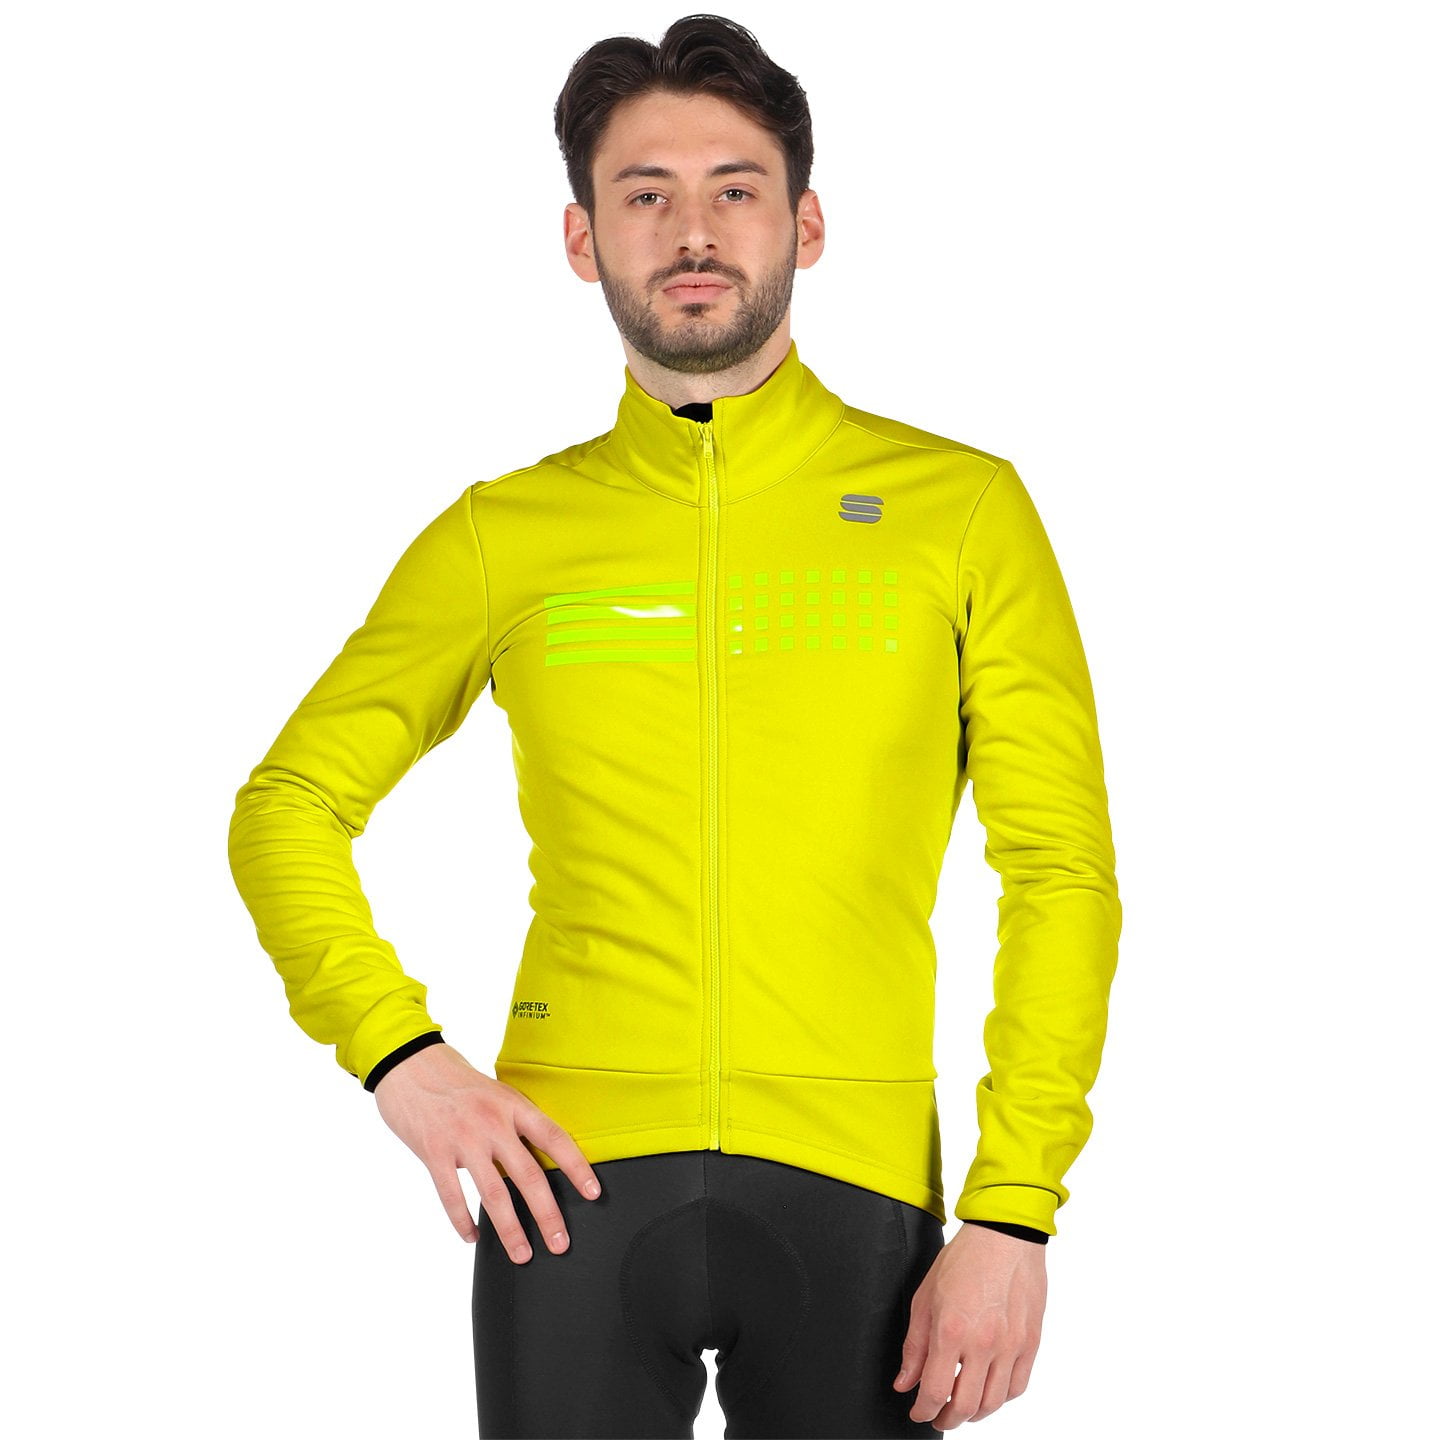 SPORTFUL Tempo Winter Jacket, for men, size M, Cycle jacket, Cycling clothing